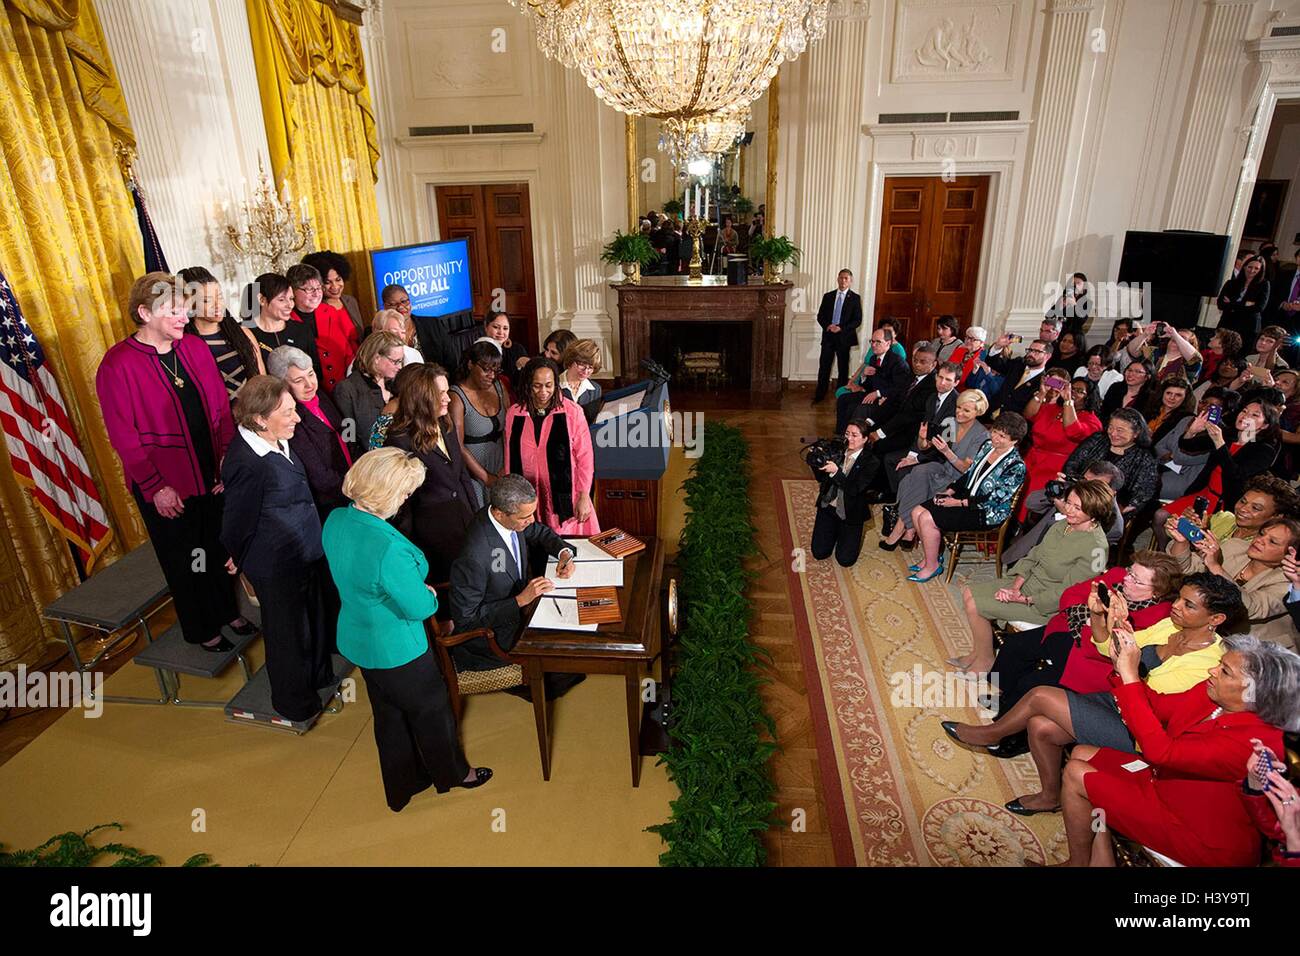 U.S President Barack Obama signs executive actions to strengthen enforcement of equal pay laws for women, at an event marking Equal Pay Day in the East Room of the White House April 8, 2014 in Washington, DC. Stock Photo